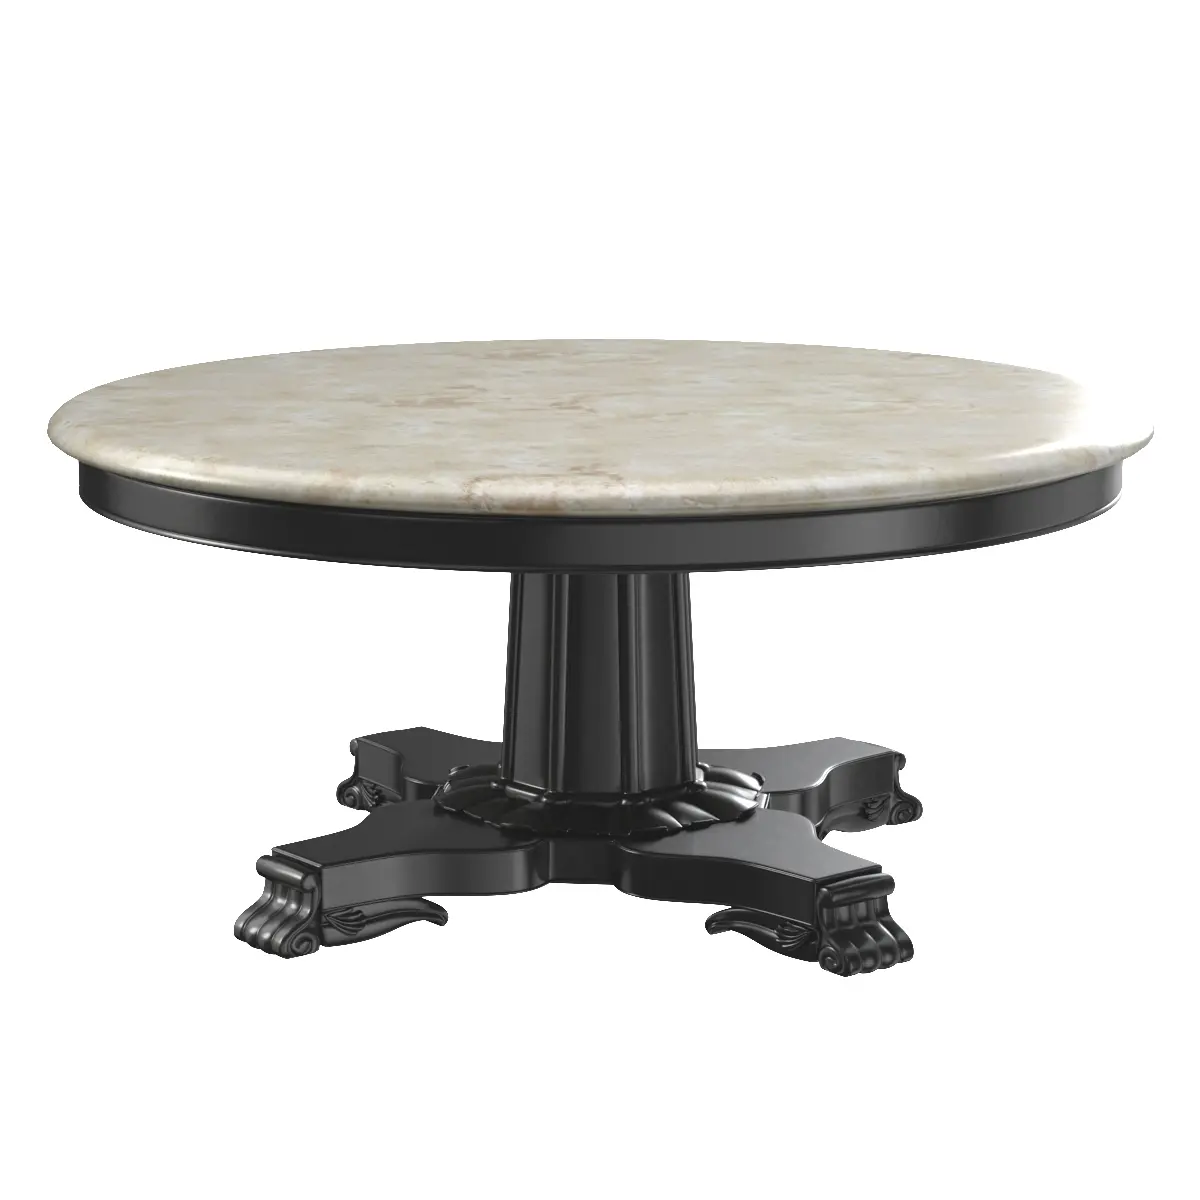 Anglo-Indian Marble and Ebonized Mahogany Centre Table 3D Model_04